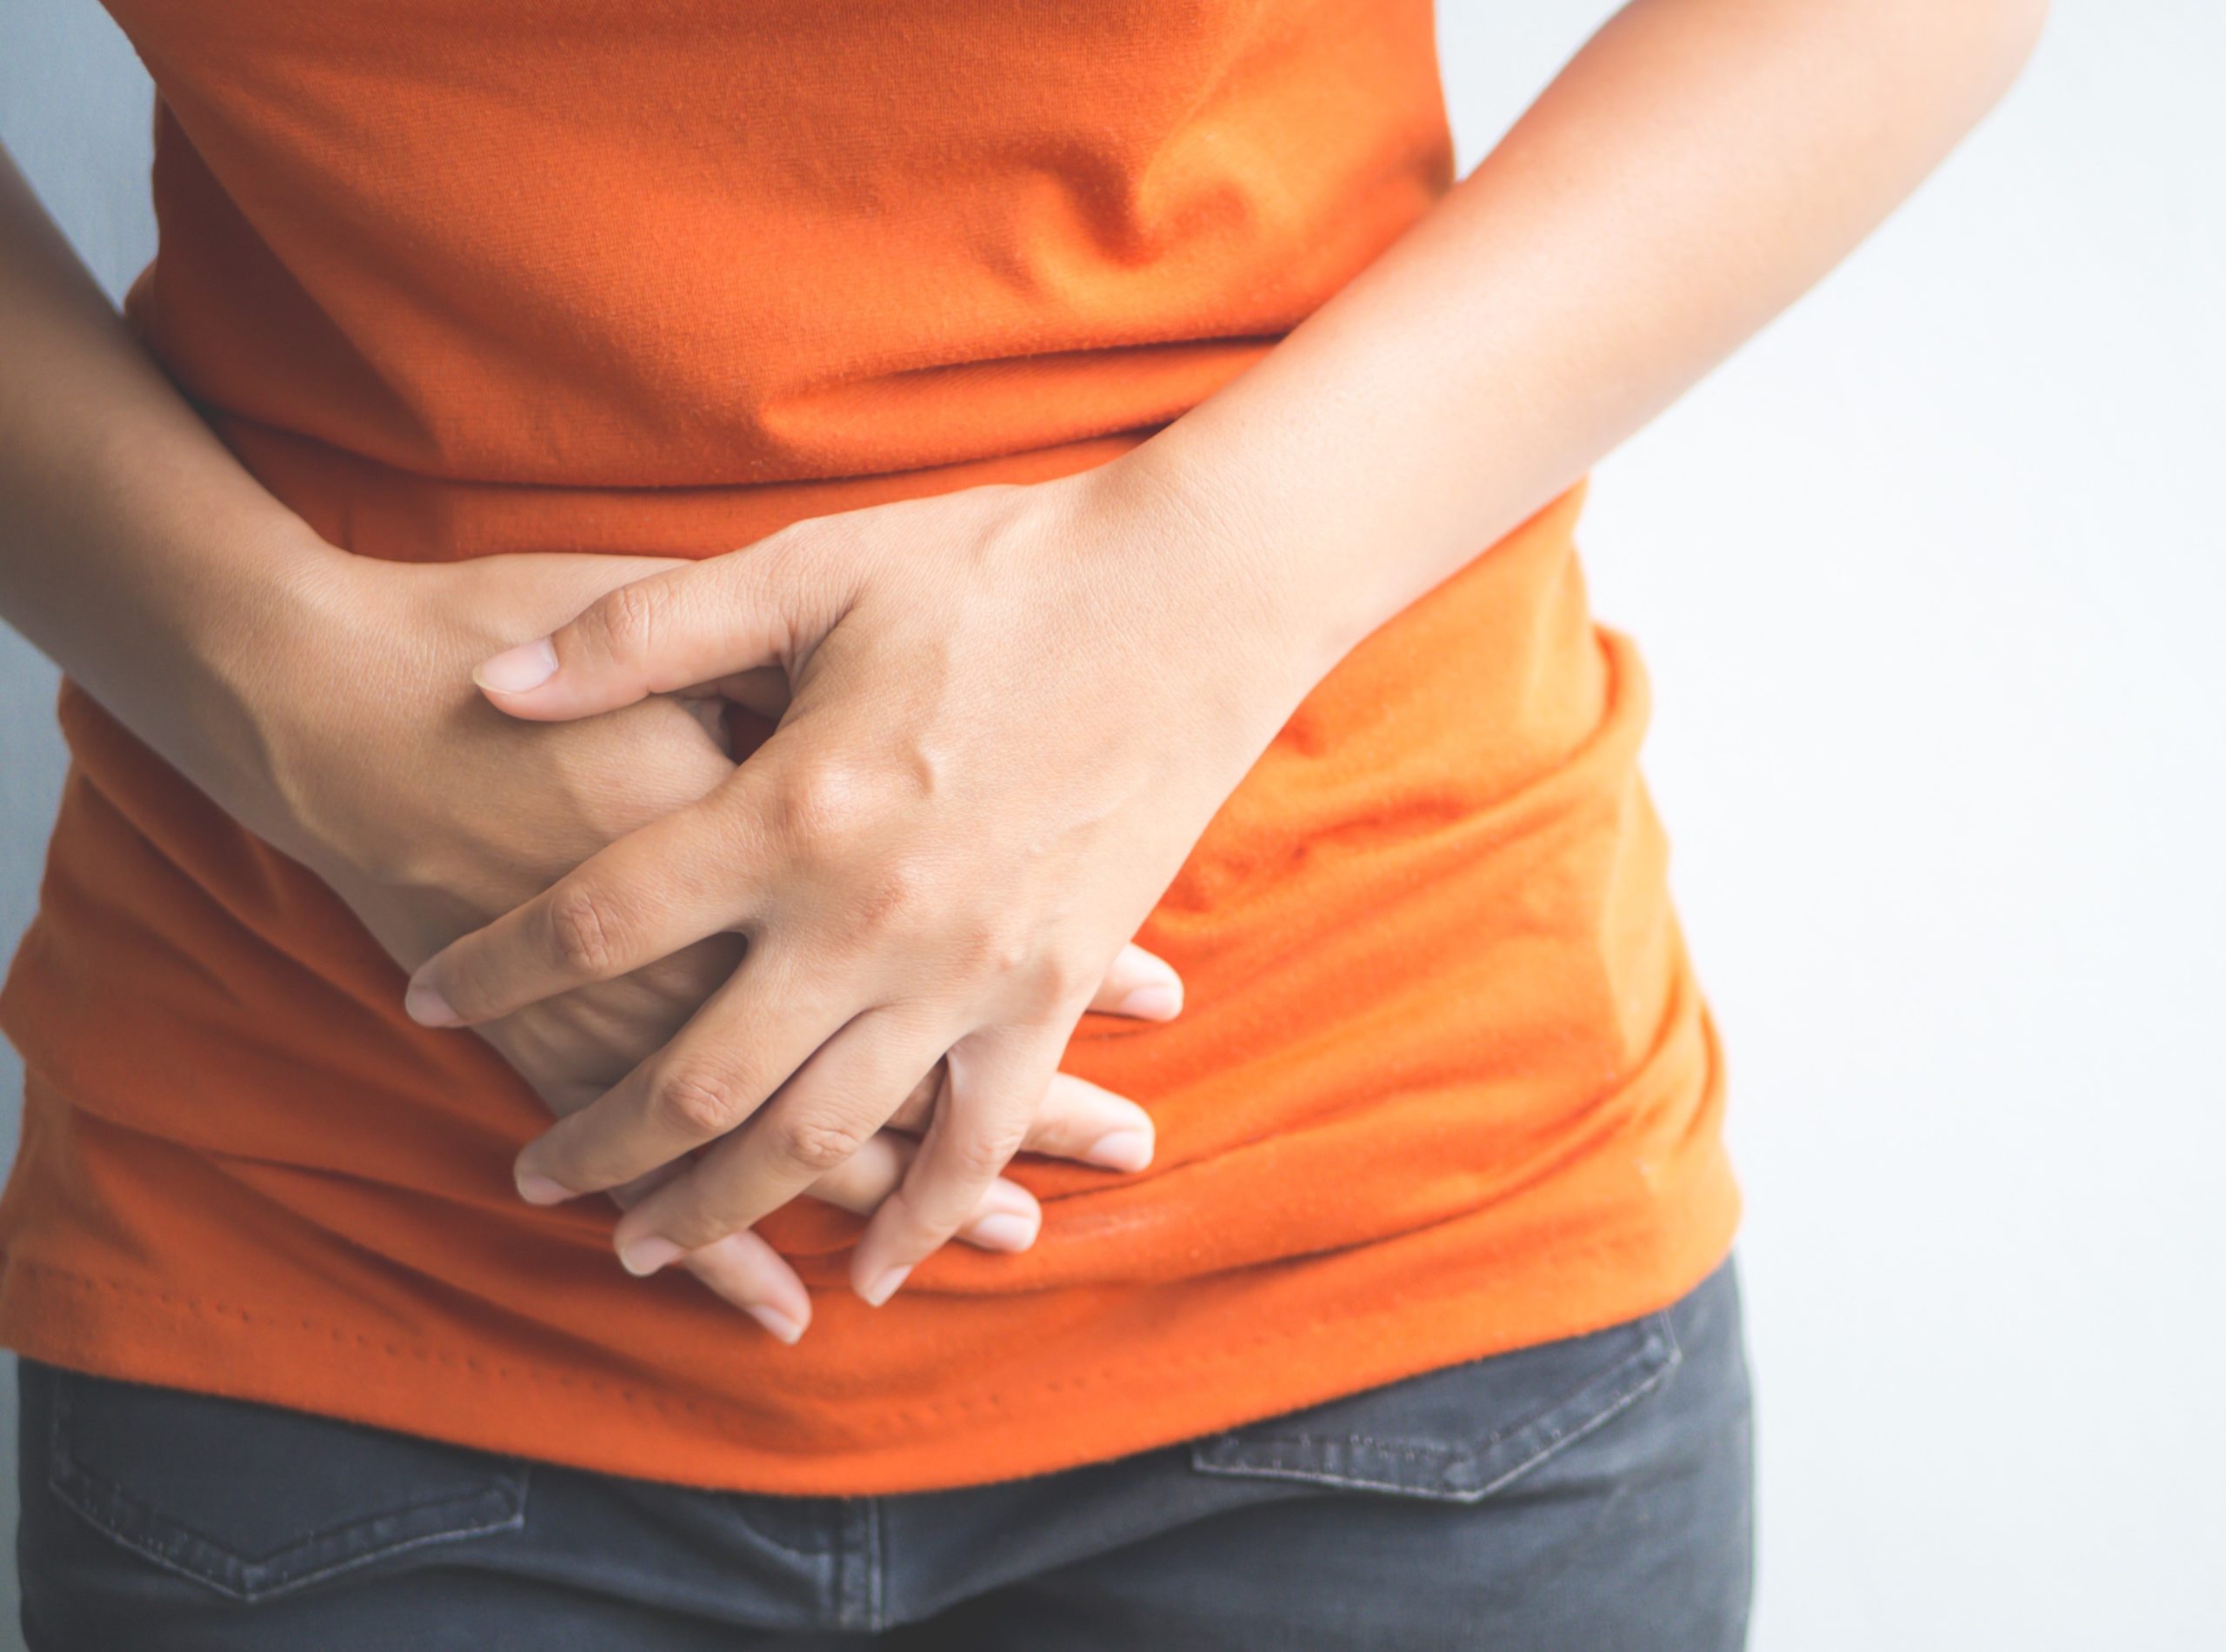 Eating habits that might lead to stomach bloating